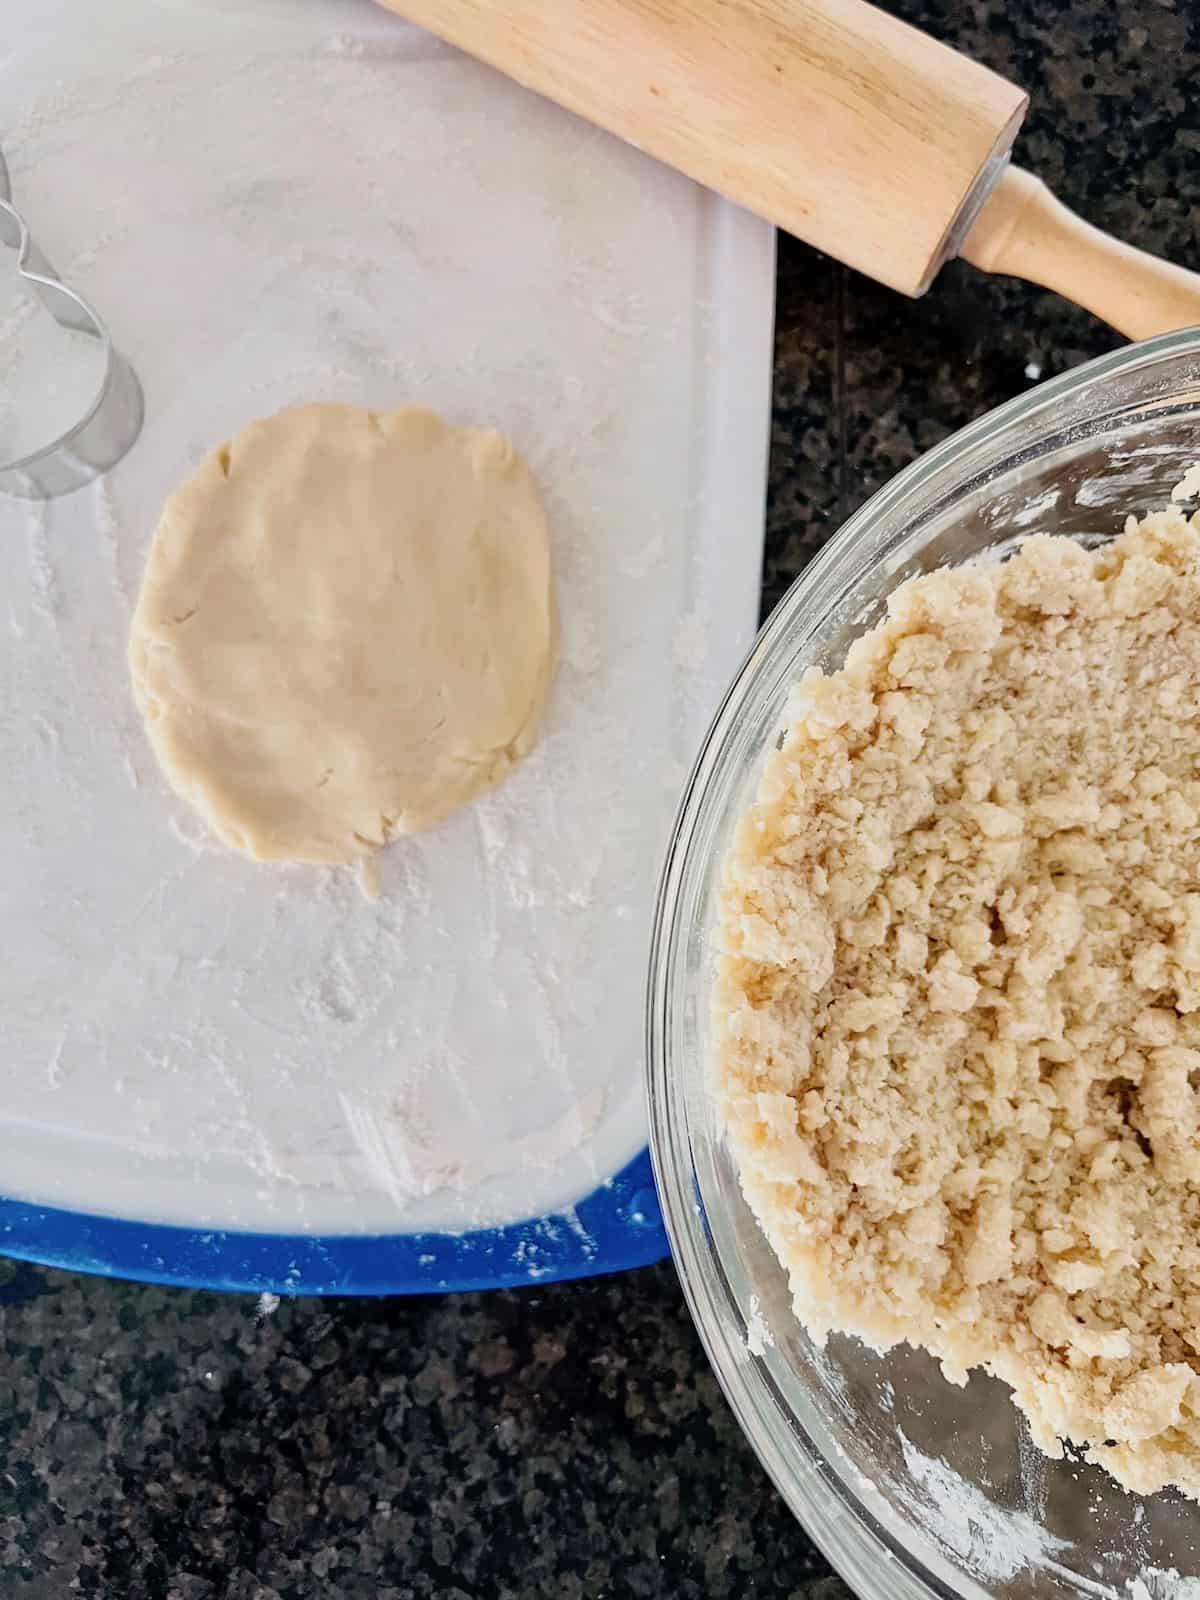 Dough that looks crumbly in a bowl next to smooth flat dough on a cutting board.